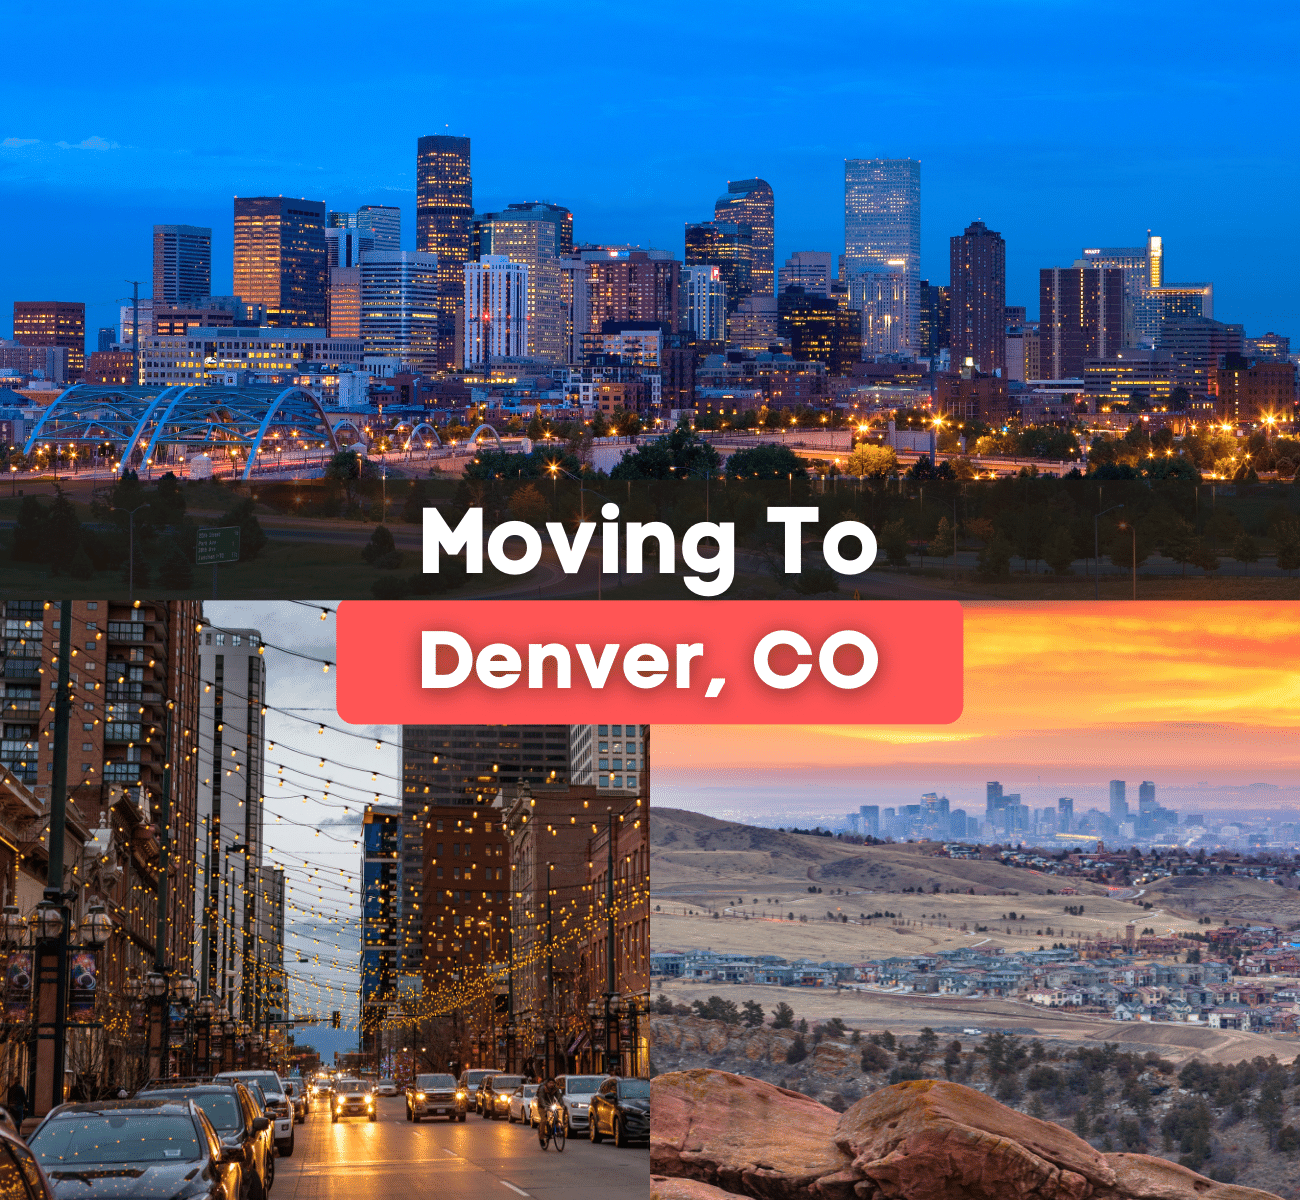 Moving to Denver Colorado - What is it like living in Denver, CO?